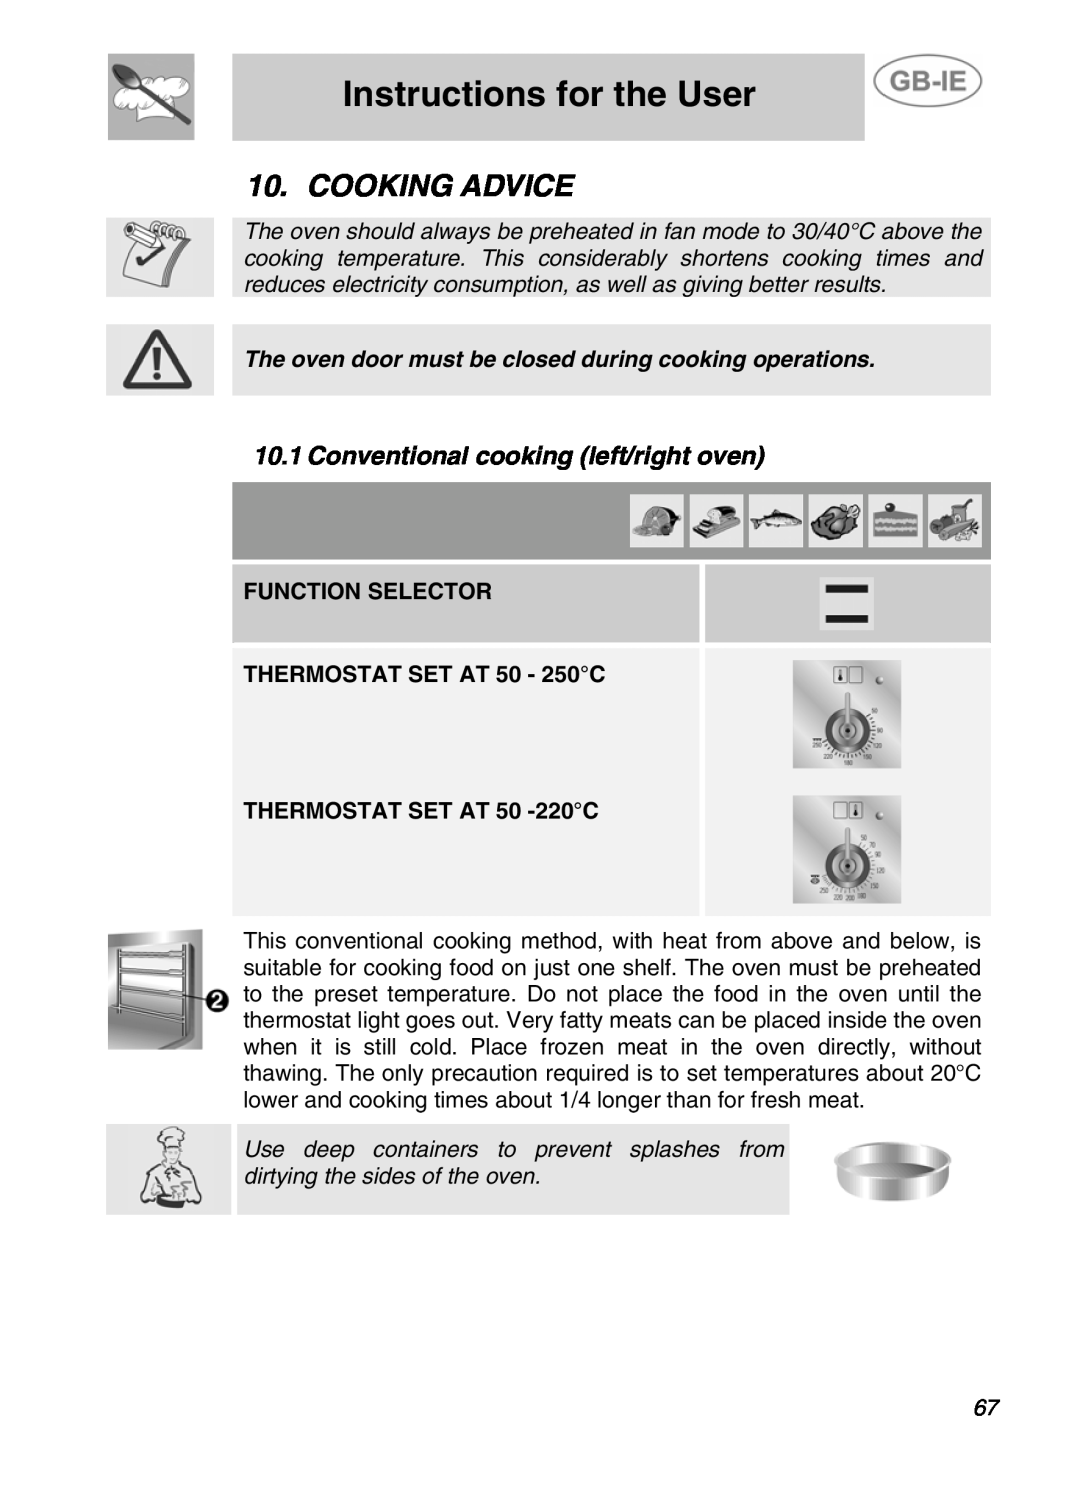 Smeg A4-5 manual Cooking Advice, Conventional cooking left/right oven, FUNCTION SELECTOR THERMOSTAT SET AT 50 - 250C 